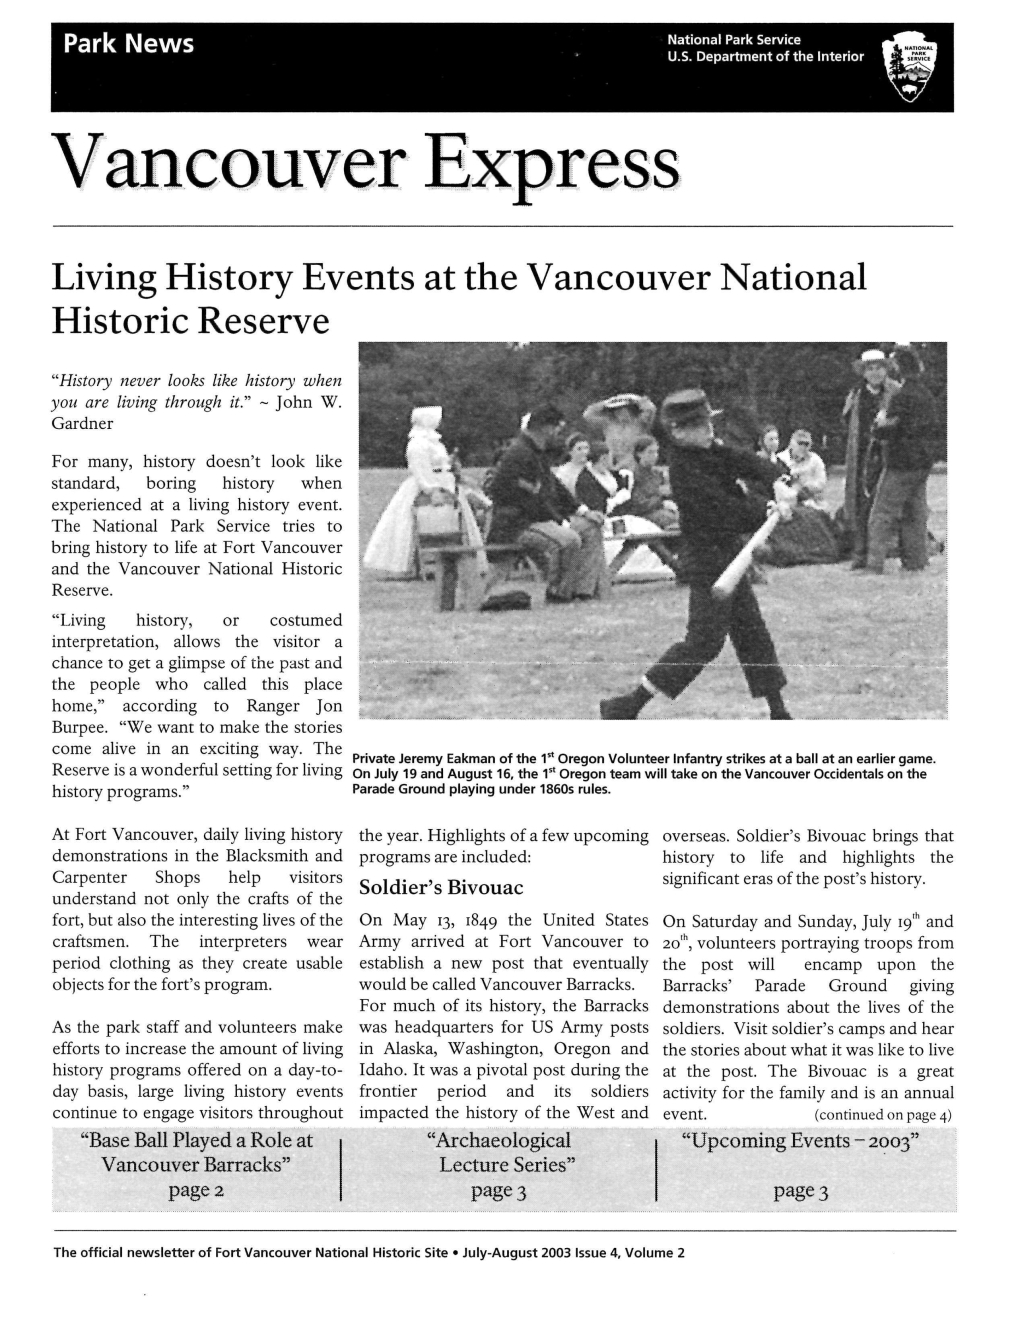 Vancouver Express